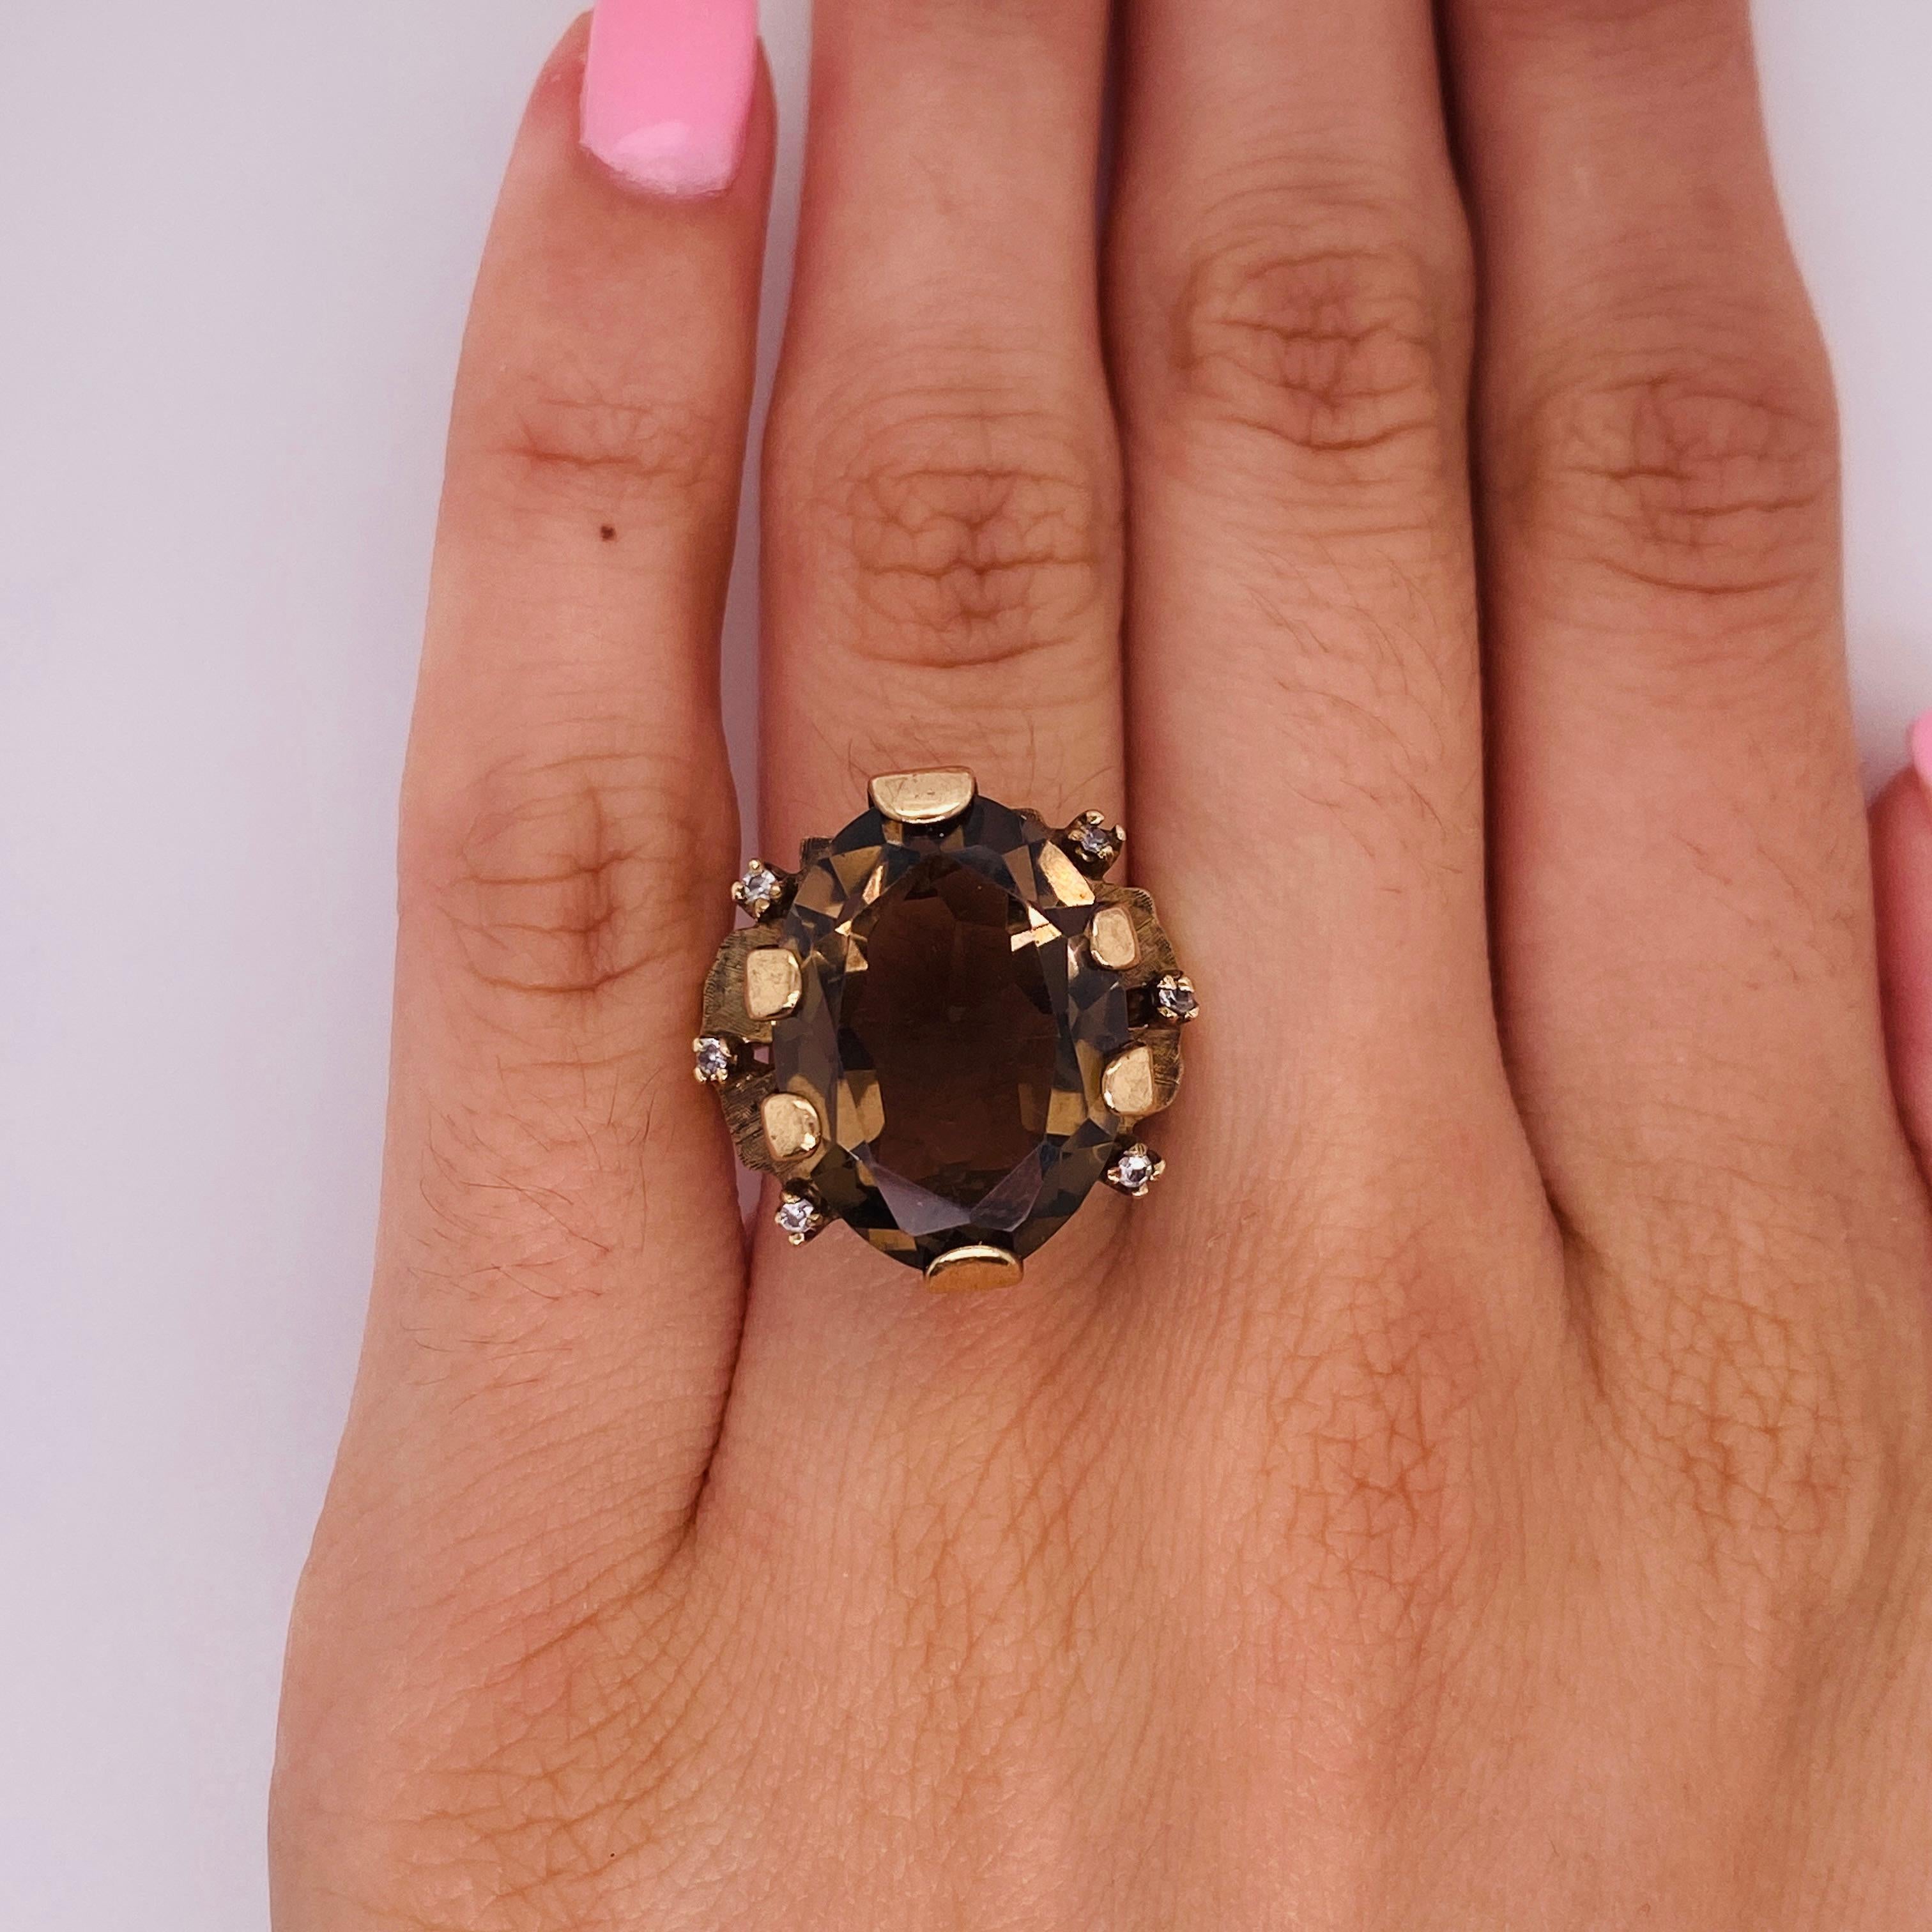 This 8.66 ct smokey quartz ring is totally unique and will look fabulous on your finger. The oval smokey quartz gemstone is set with six flat prongs and accented with six small diamonds that have a total weight of .08 carats. The solid 10 karat